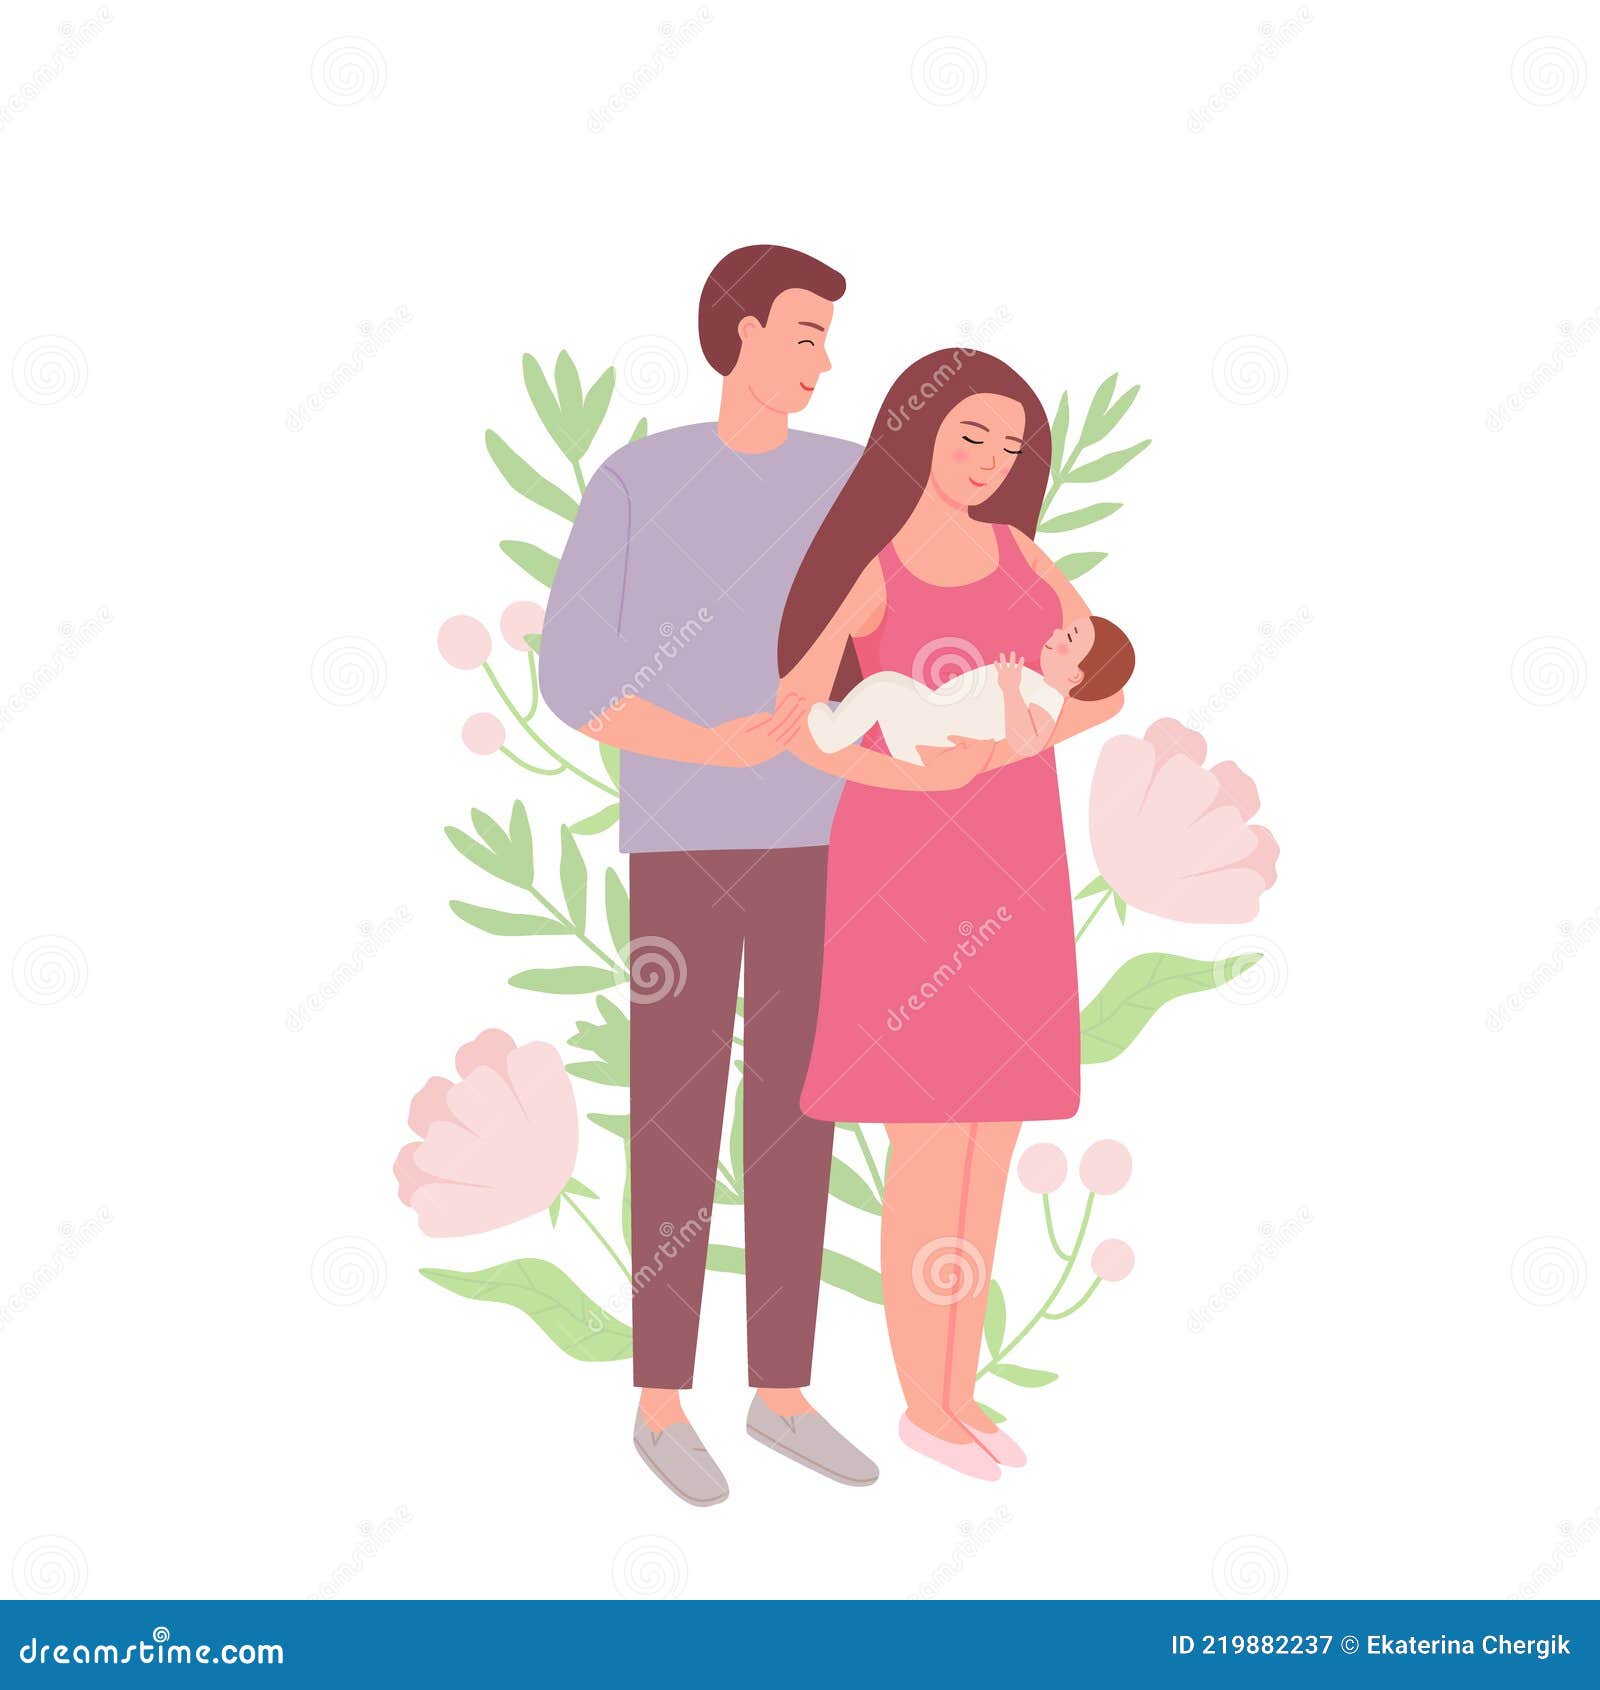 Husband and Wife with a Baby. a Happy Young Family on a Background of  Leaves and Flowers Stock Vector - Illustration of young, design: 219882237